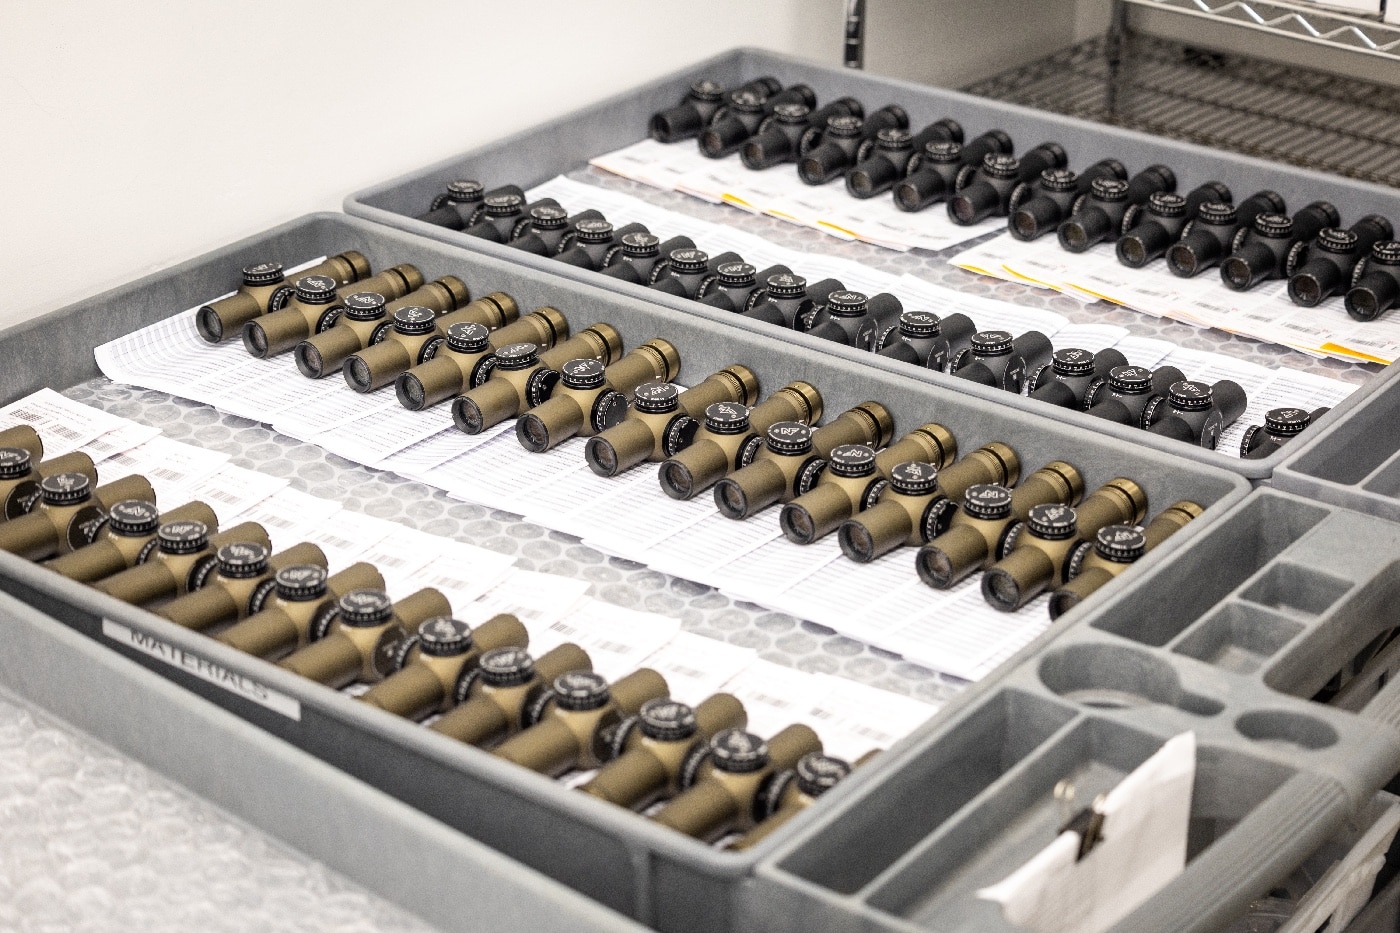 Two trays of Nightforce Optics scopes are shown in this photo. The closest tray has anodized scopes in a flat dark earth color. The farther tray is full of scopes with a black anodized finish.